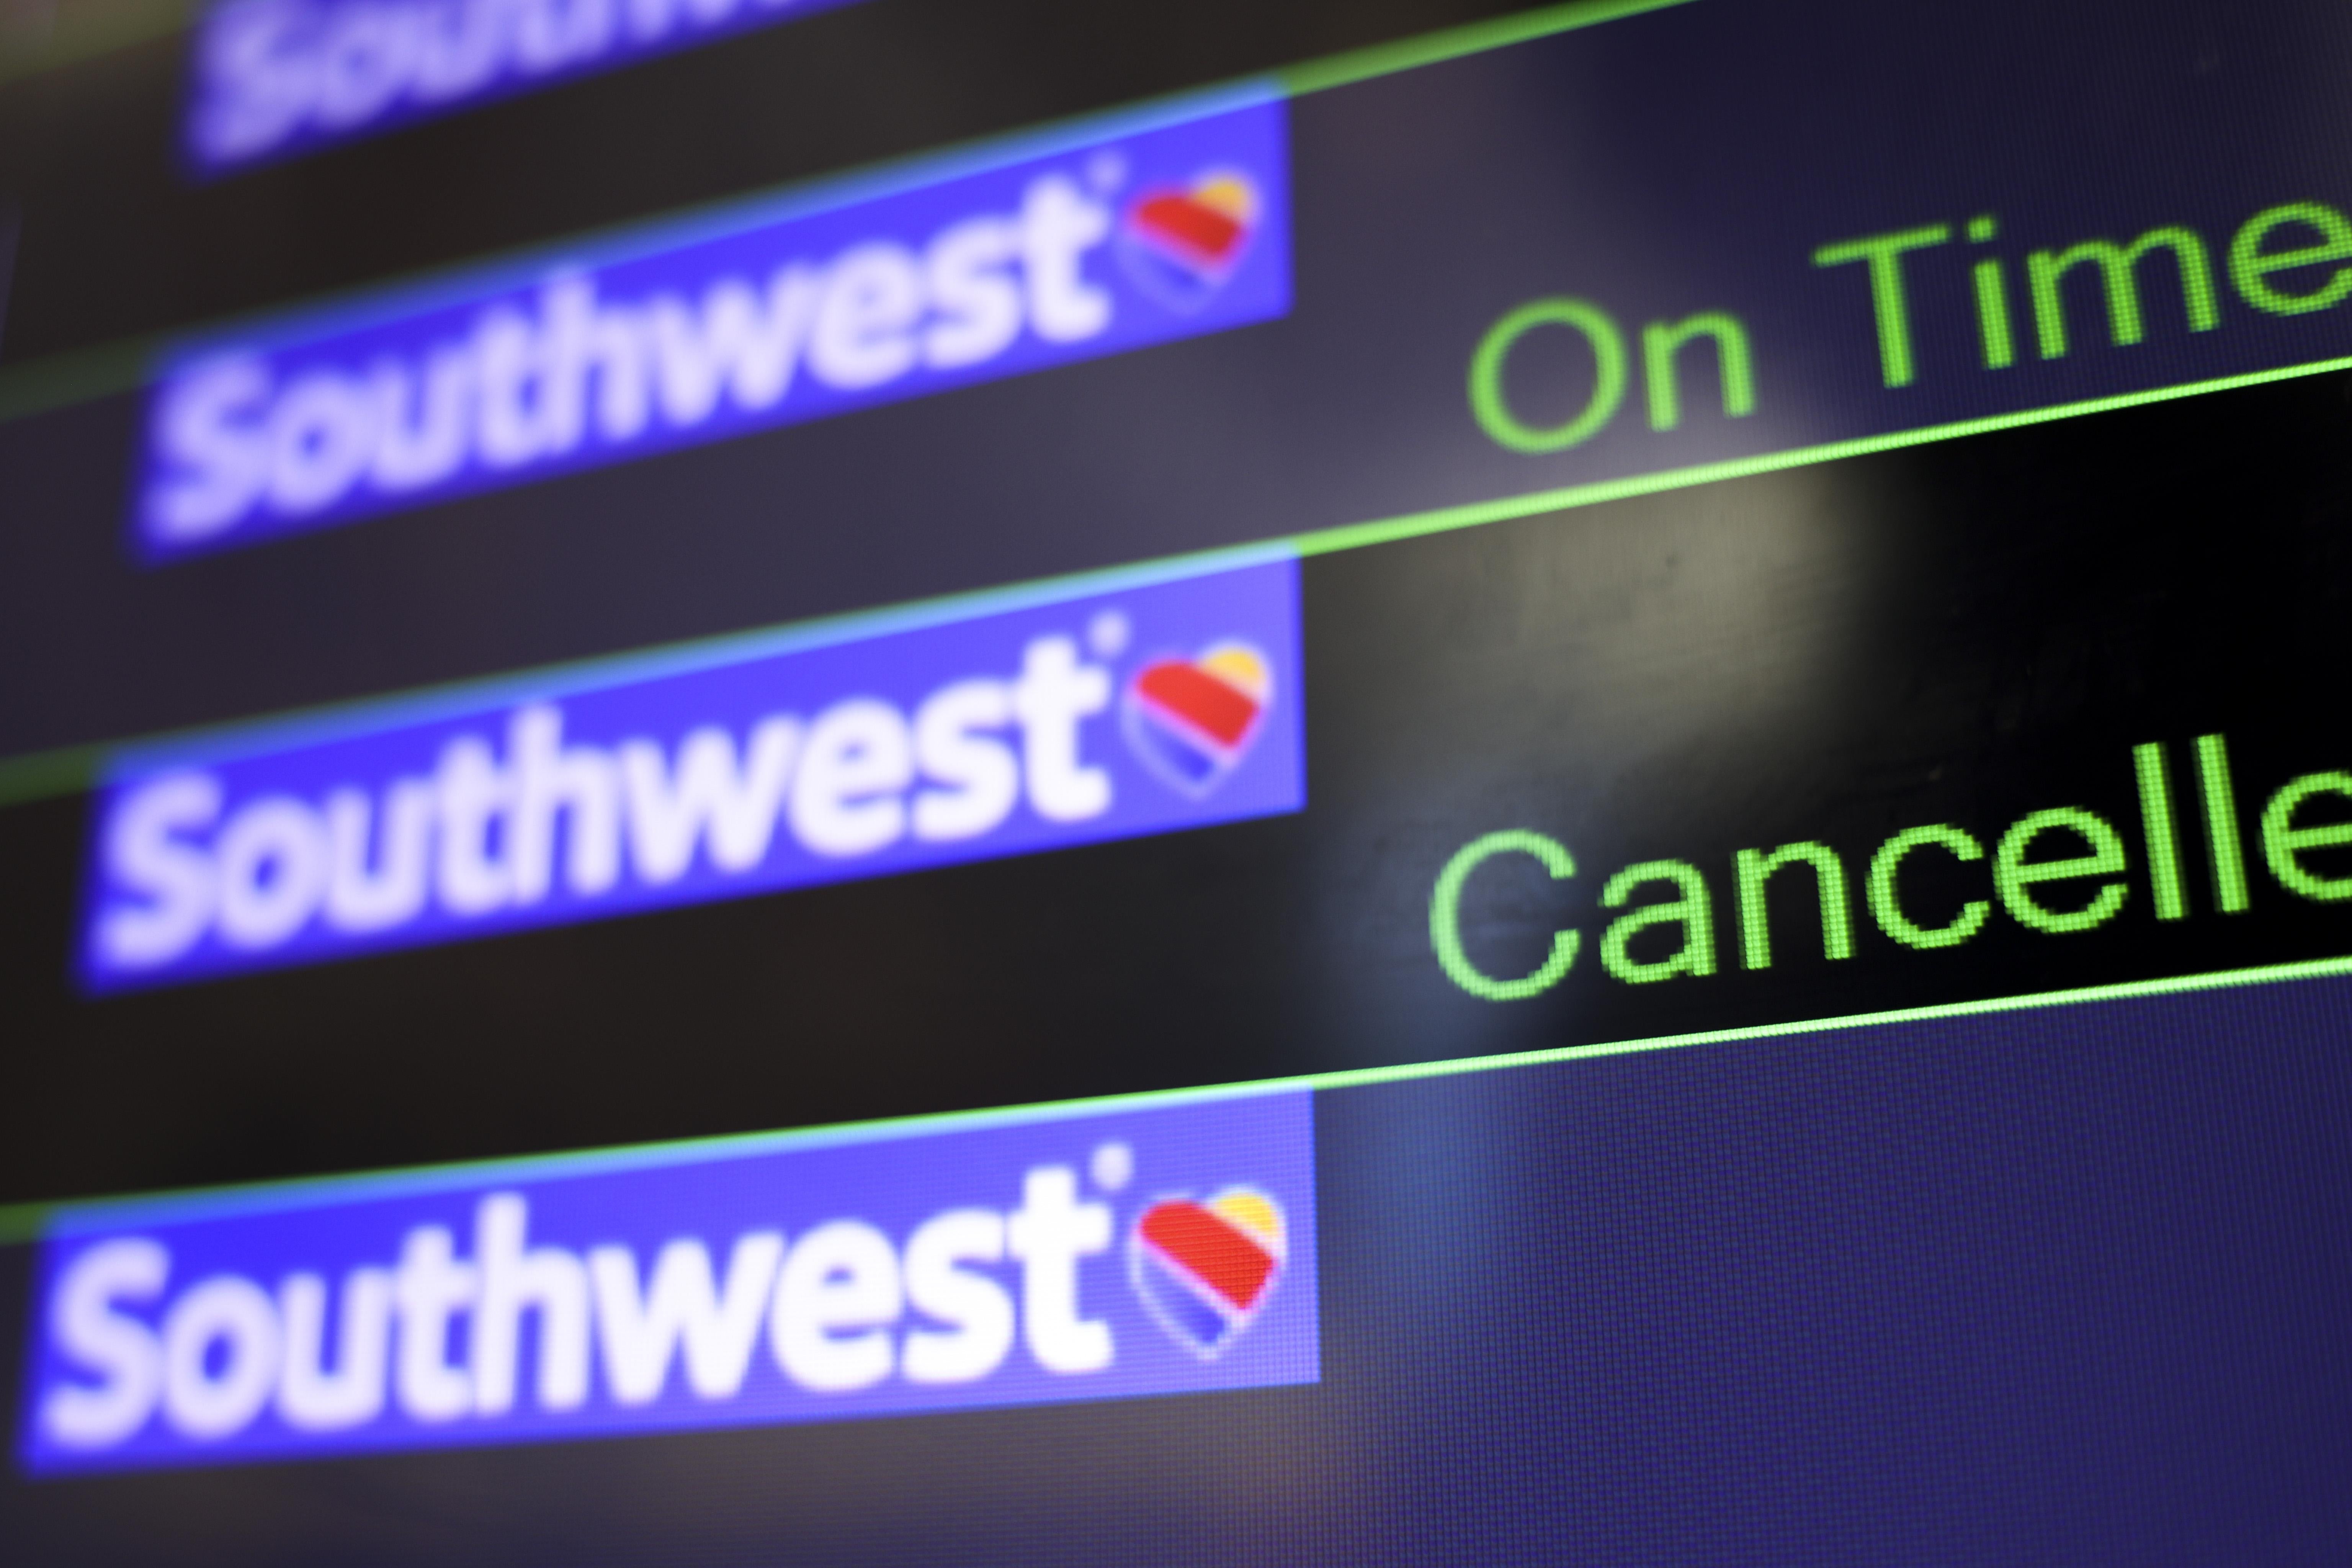 A screen displays Southwest Airlines flight information.